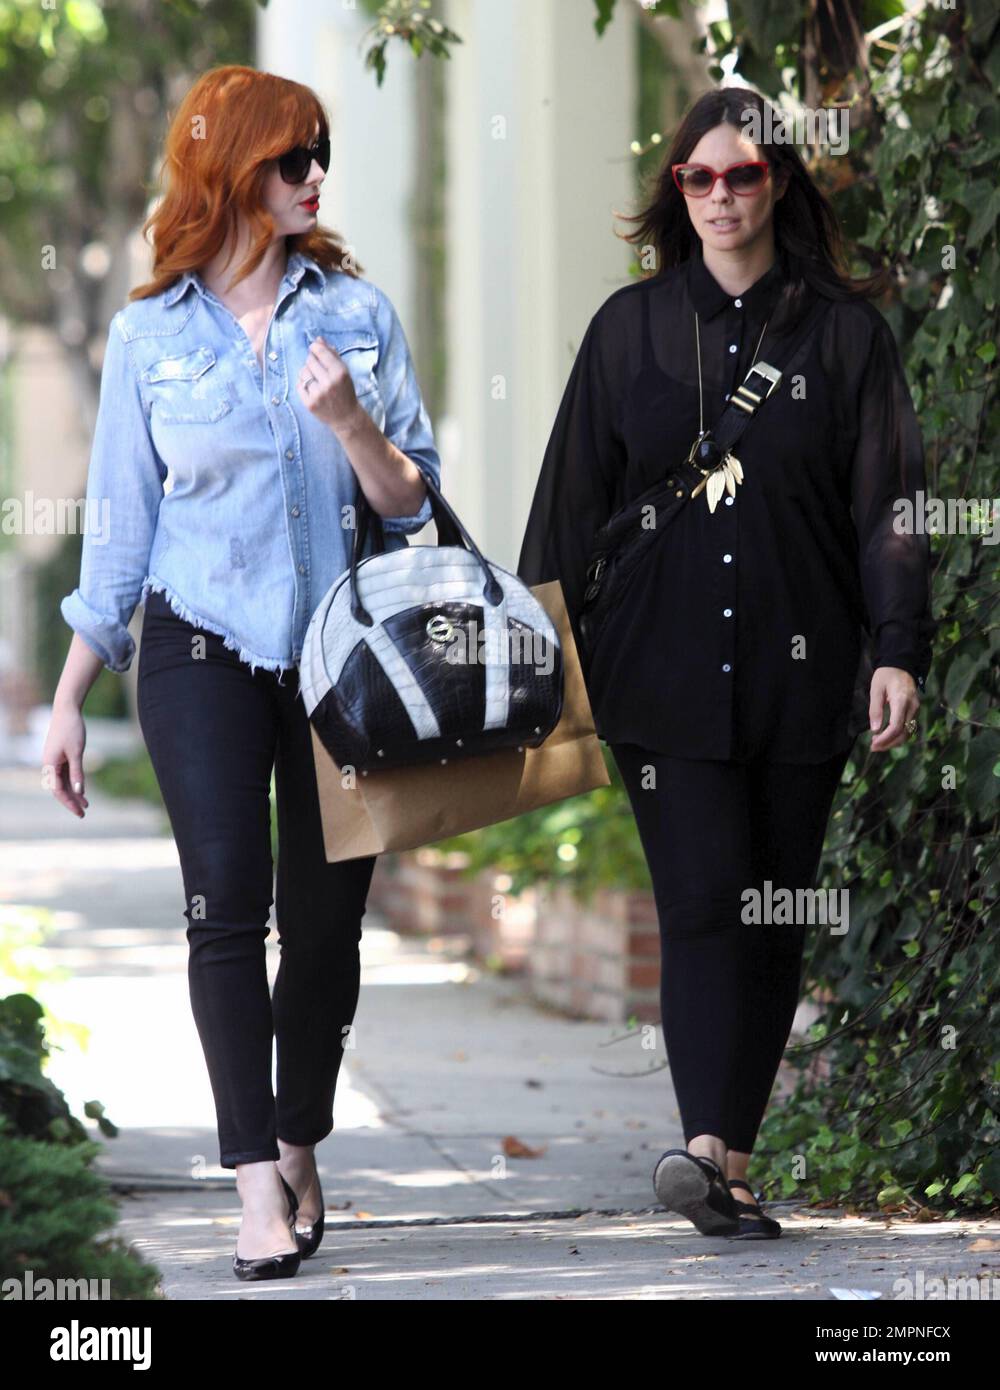 Looking glamorous in skinny jeans with black pumps and a denim shirt, "Mad  Men" star Christina Hendricks sports bright red lipstick as she gets in a  day of shopping with a friend.